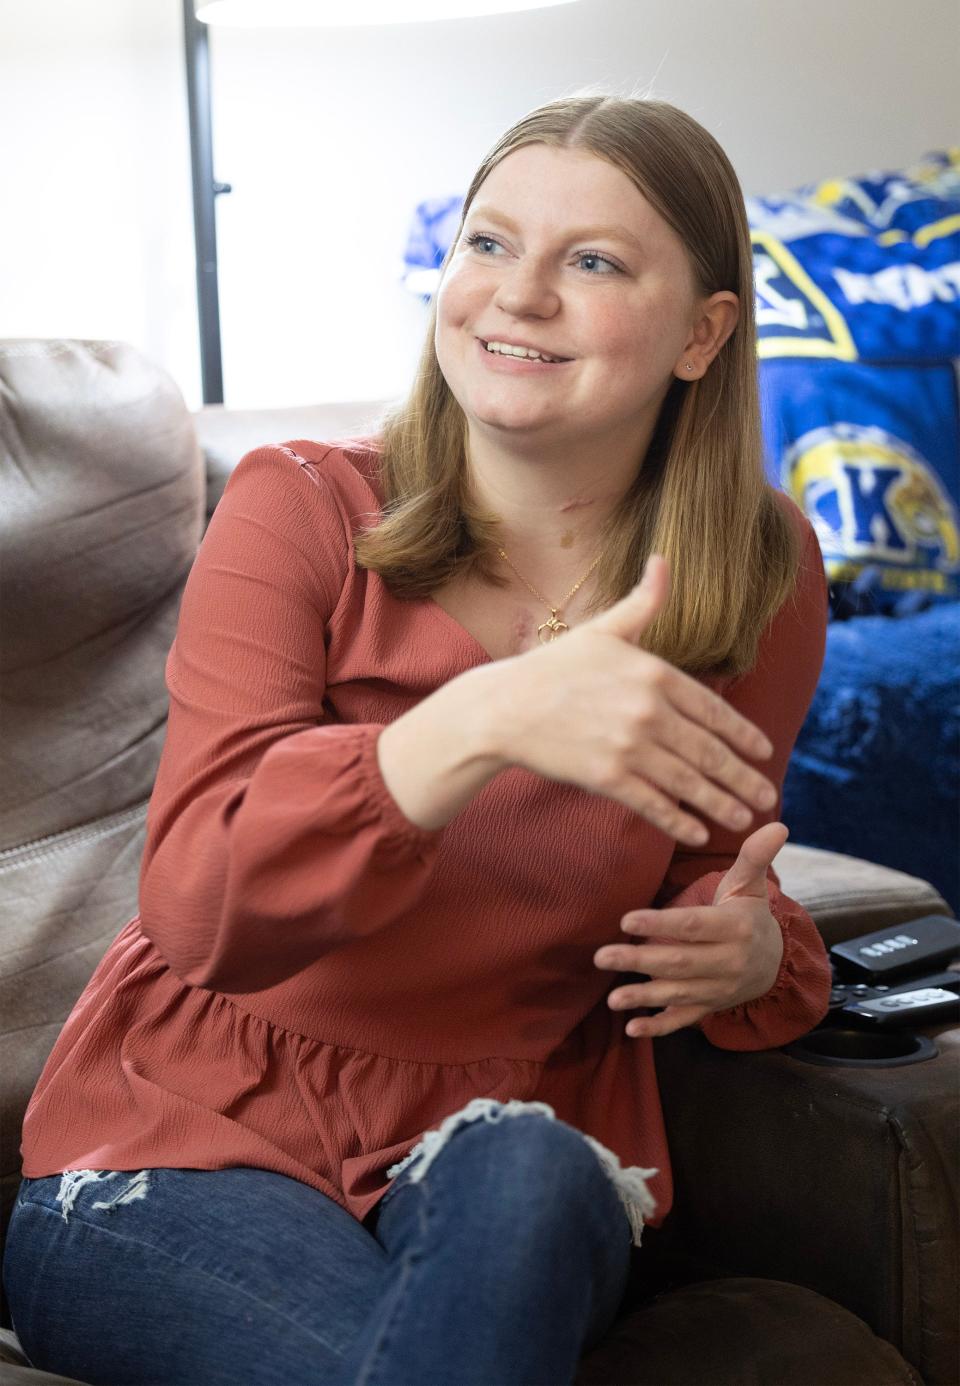 After a lifetime of heart procedures, Plain Township native Katherine Schroeder-Herrmann underwent a successful heart transplant last year. It's given her a life she's never known.